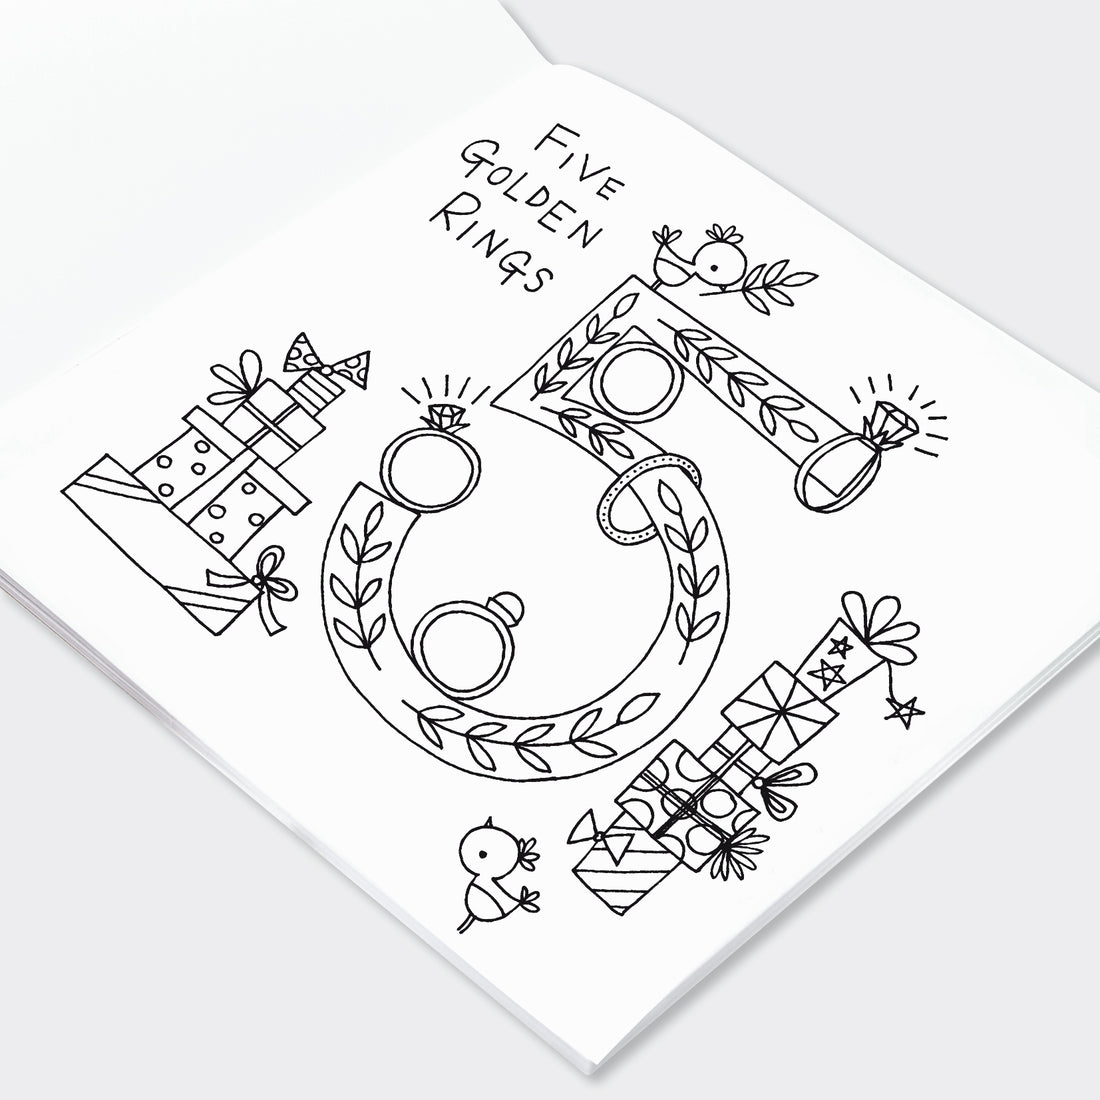 12 Days of Christmas Colouring Book